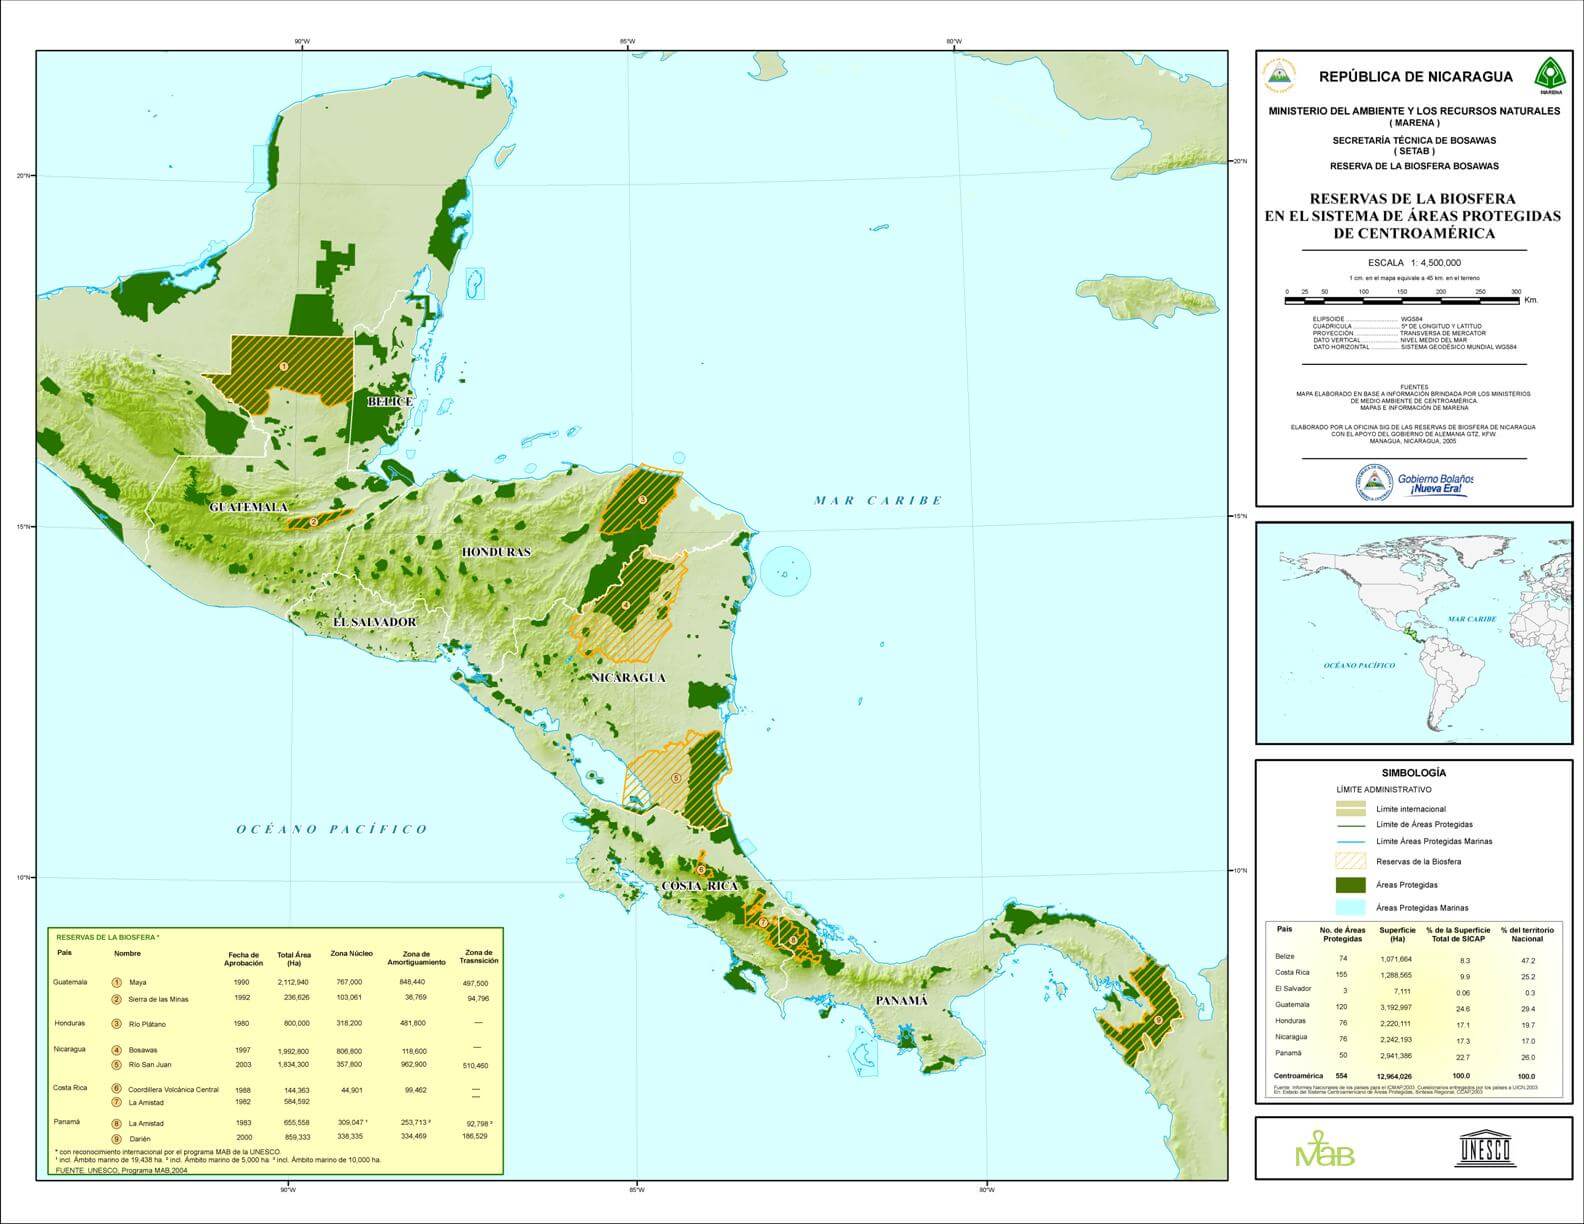 biosphere reserves of central america map 2005